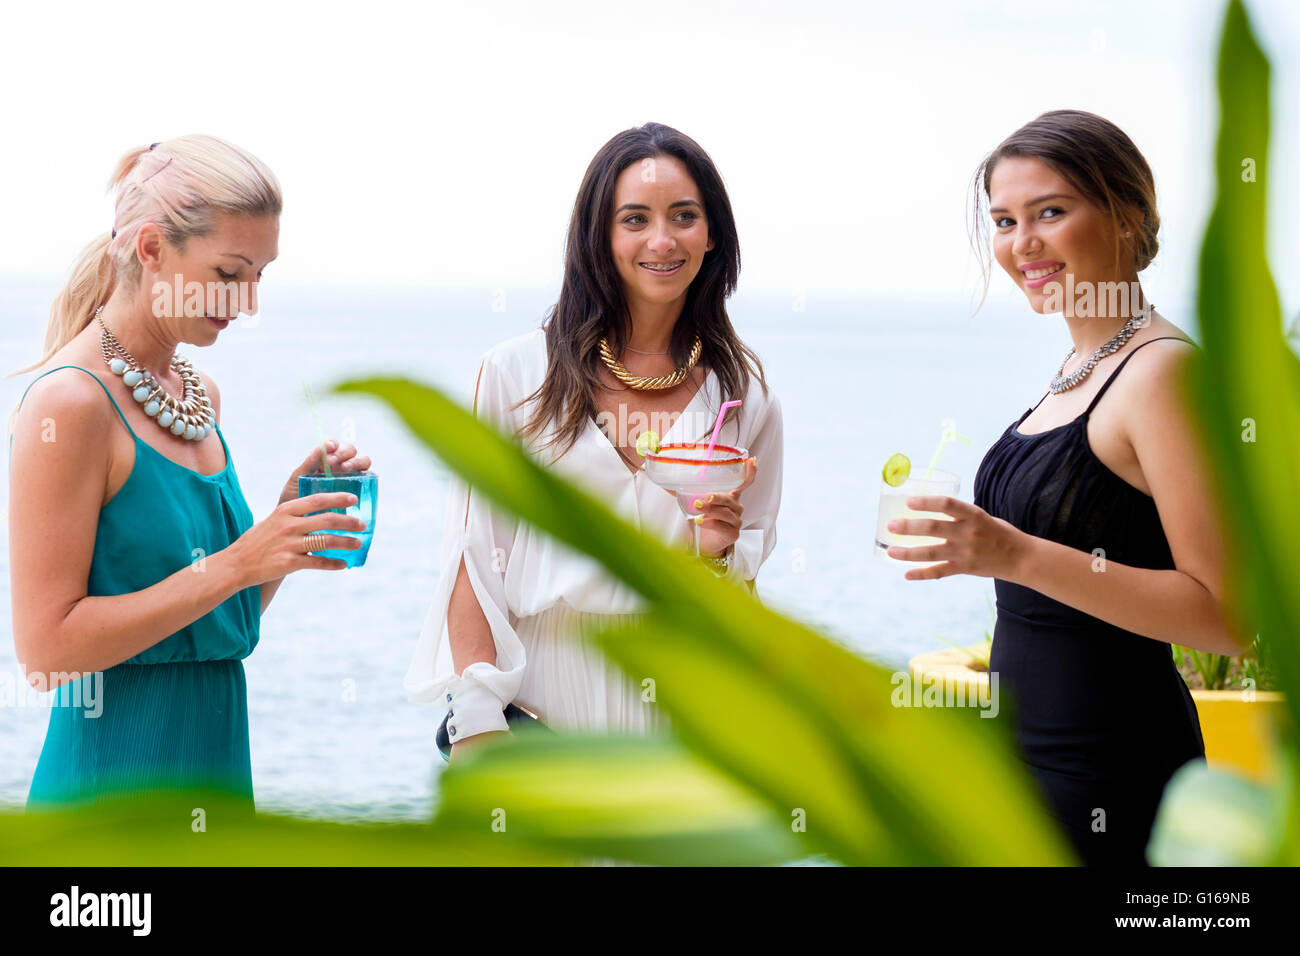 Three young attractive women in elegant dresses enjoying an outdoor cocktail party in Puerto Vallarta, Mexico Stock Photo